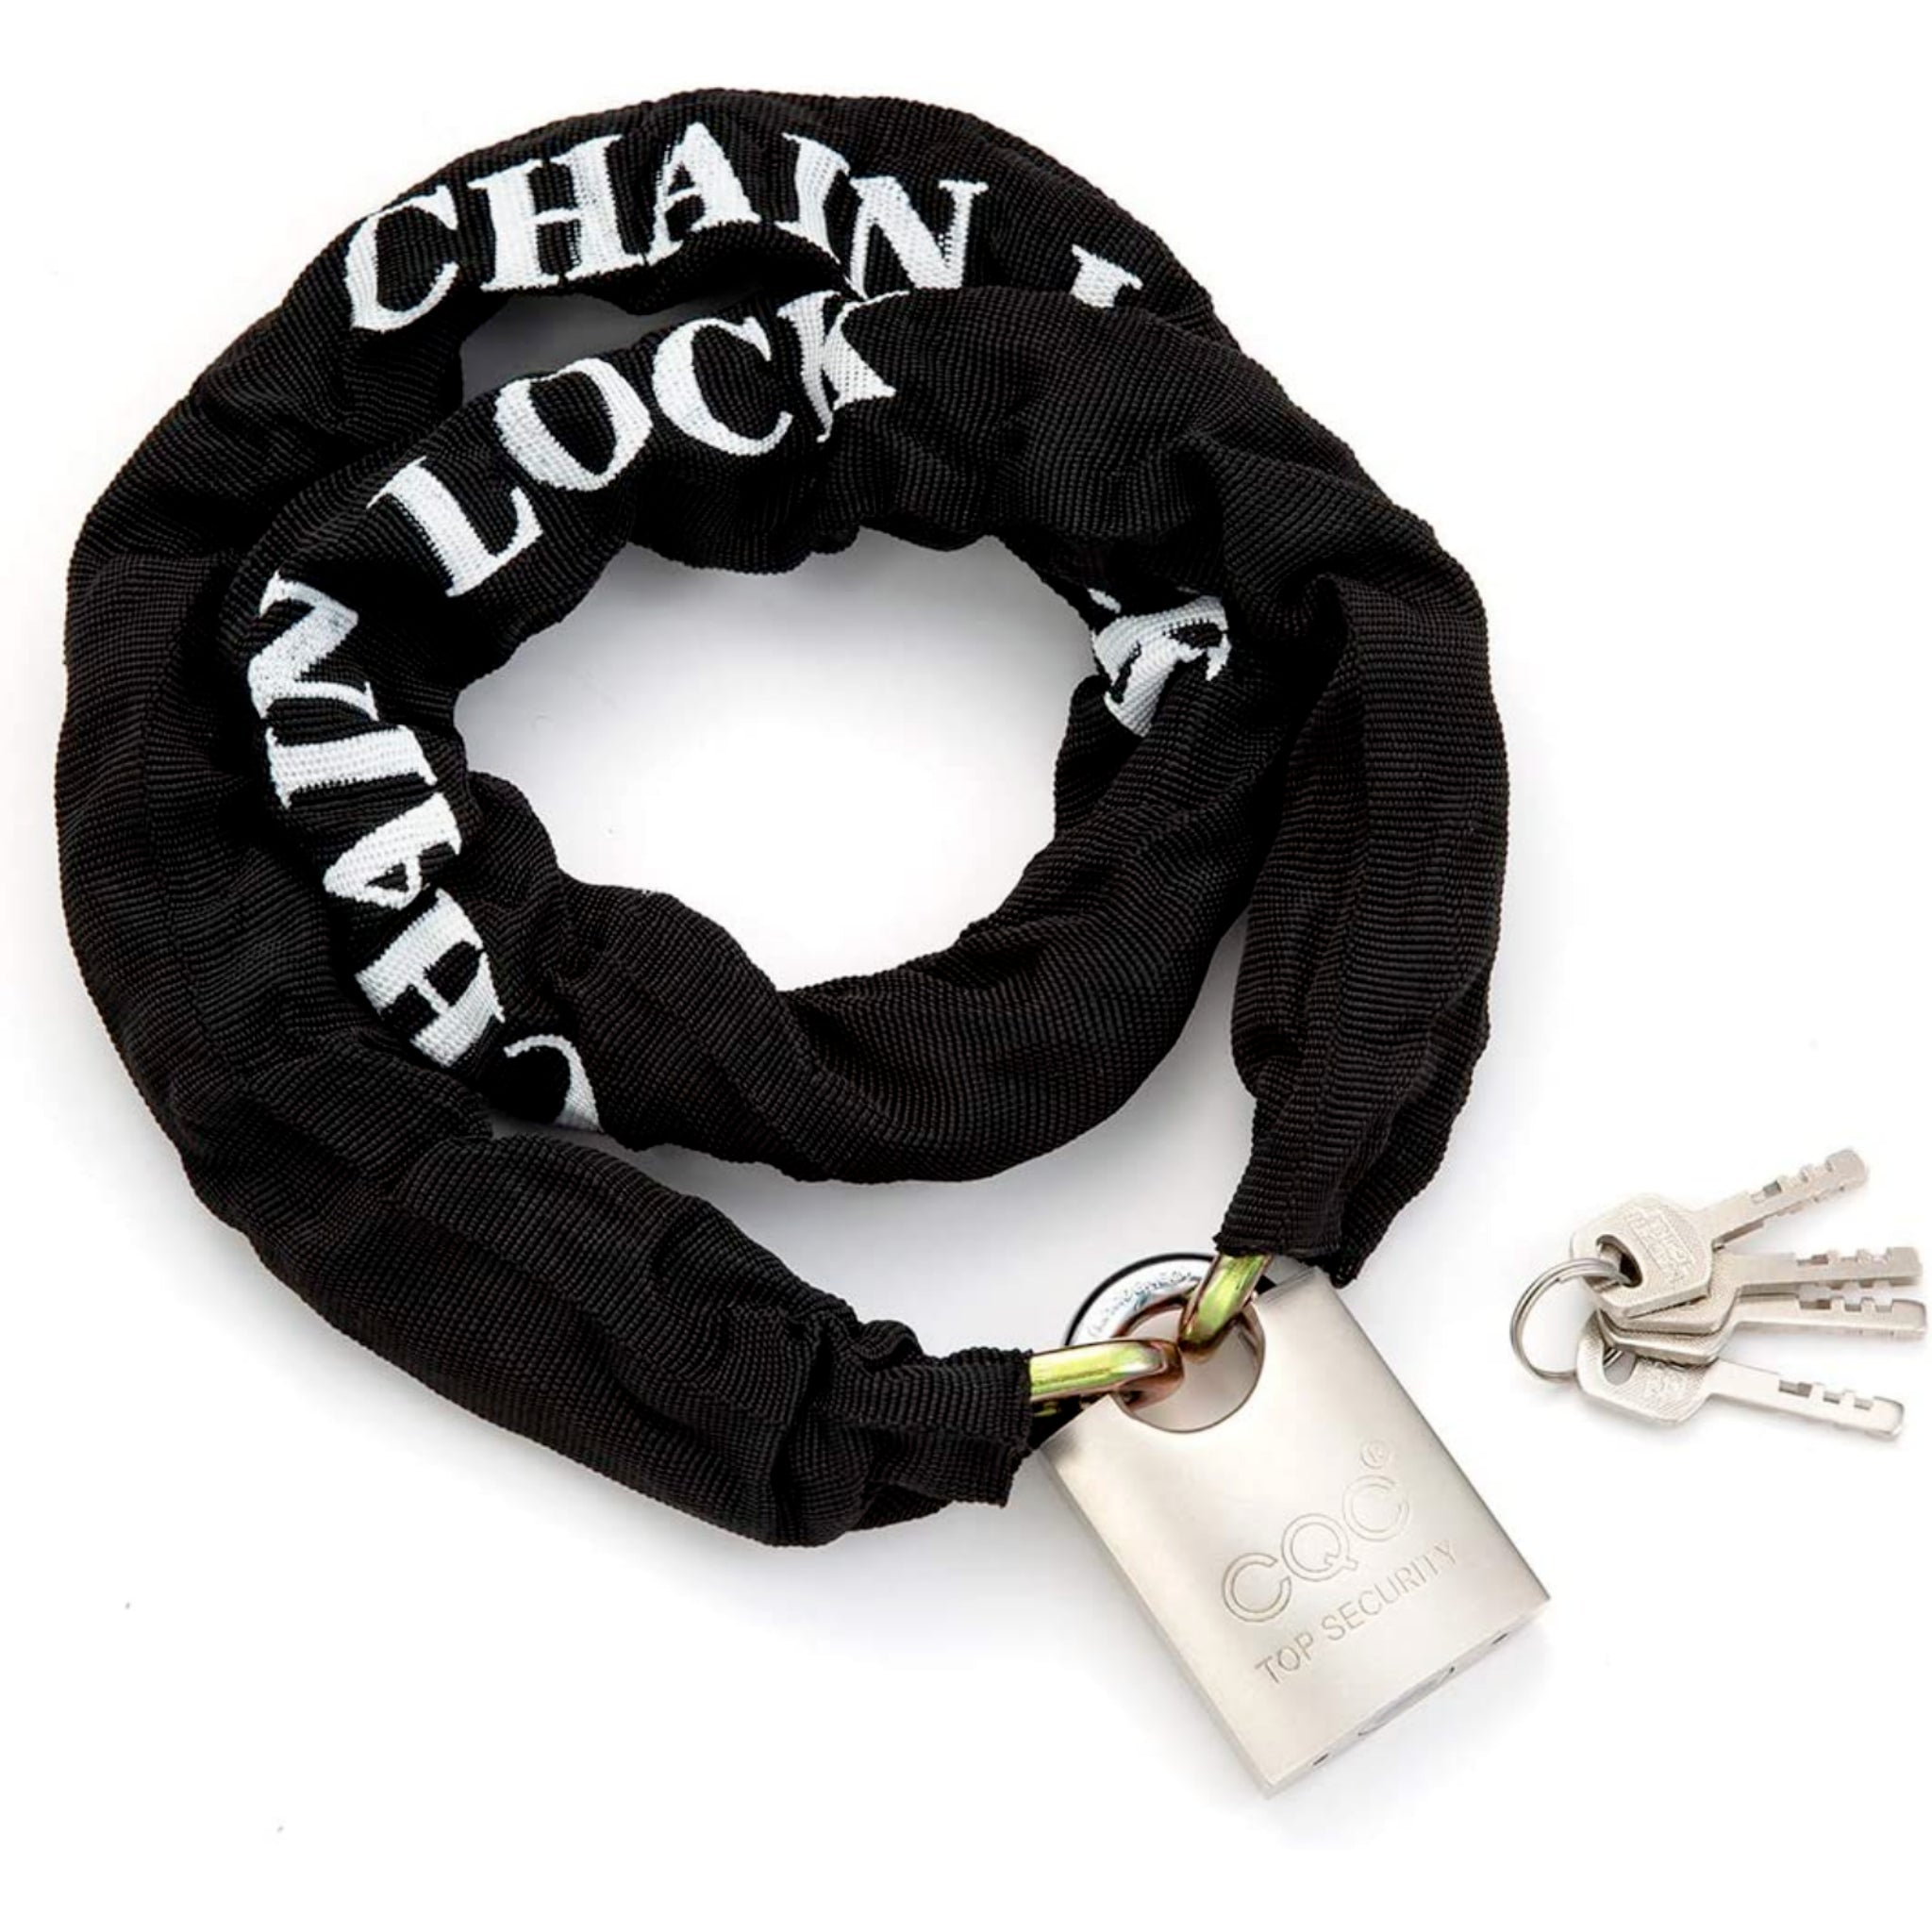 Beclen Harp Anti-Theft Heavy Duty Strong Motorcycle/Motobike/Cycle/Scooter Security Chain And Padlock Lock